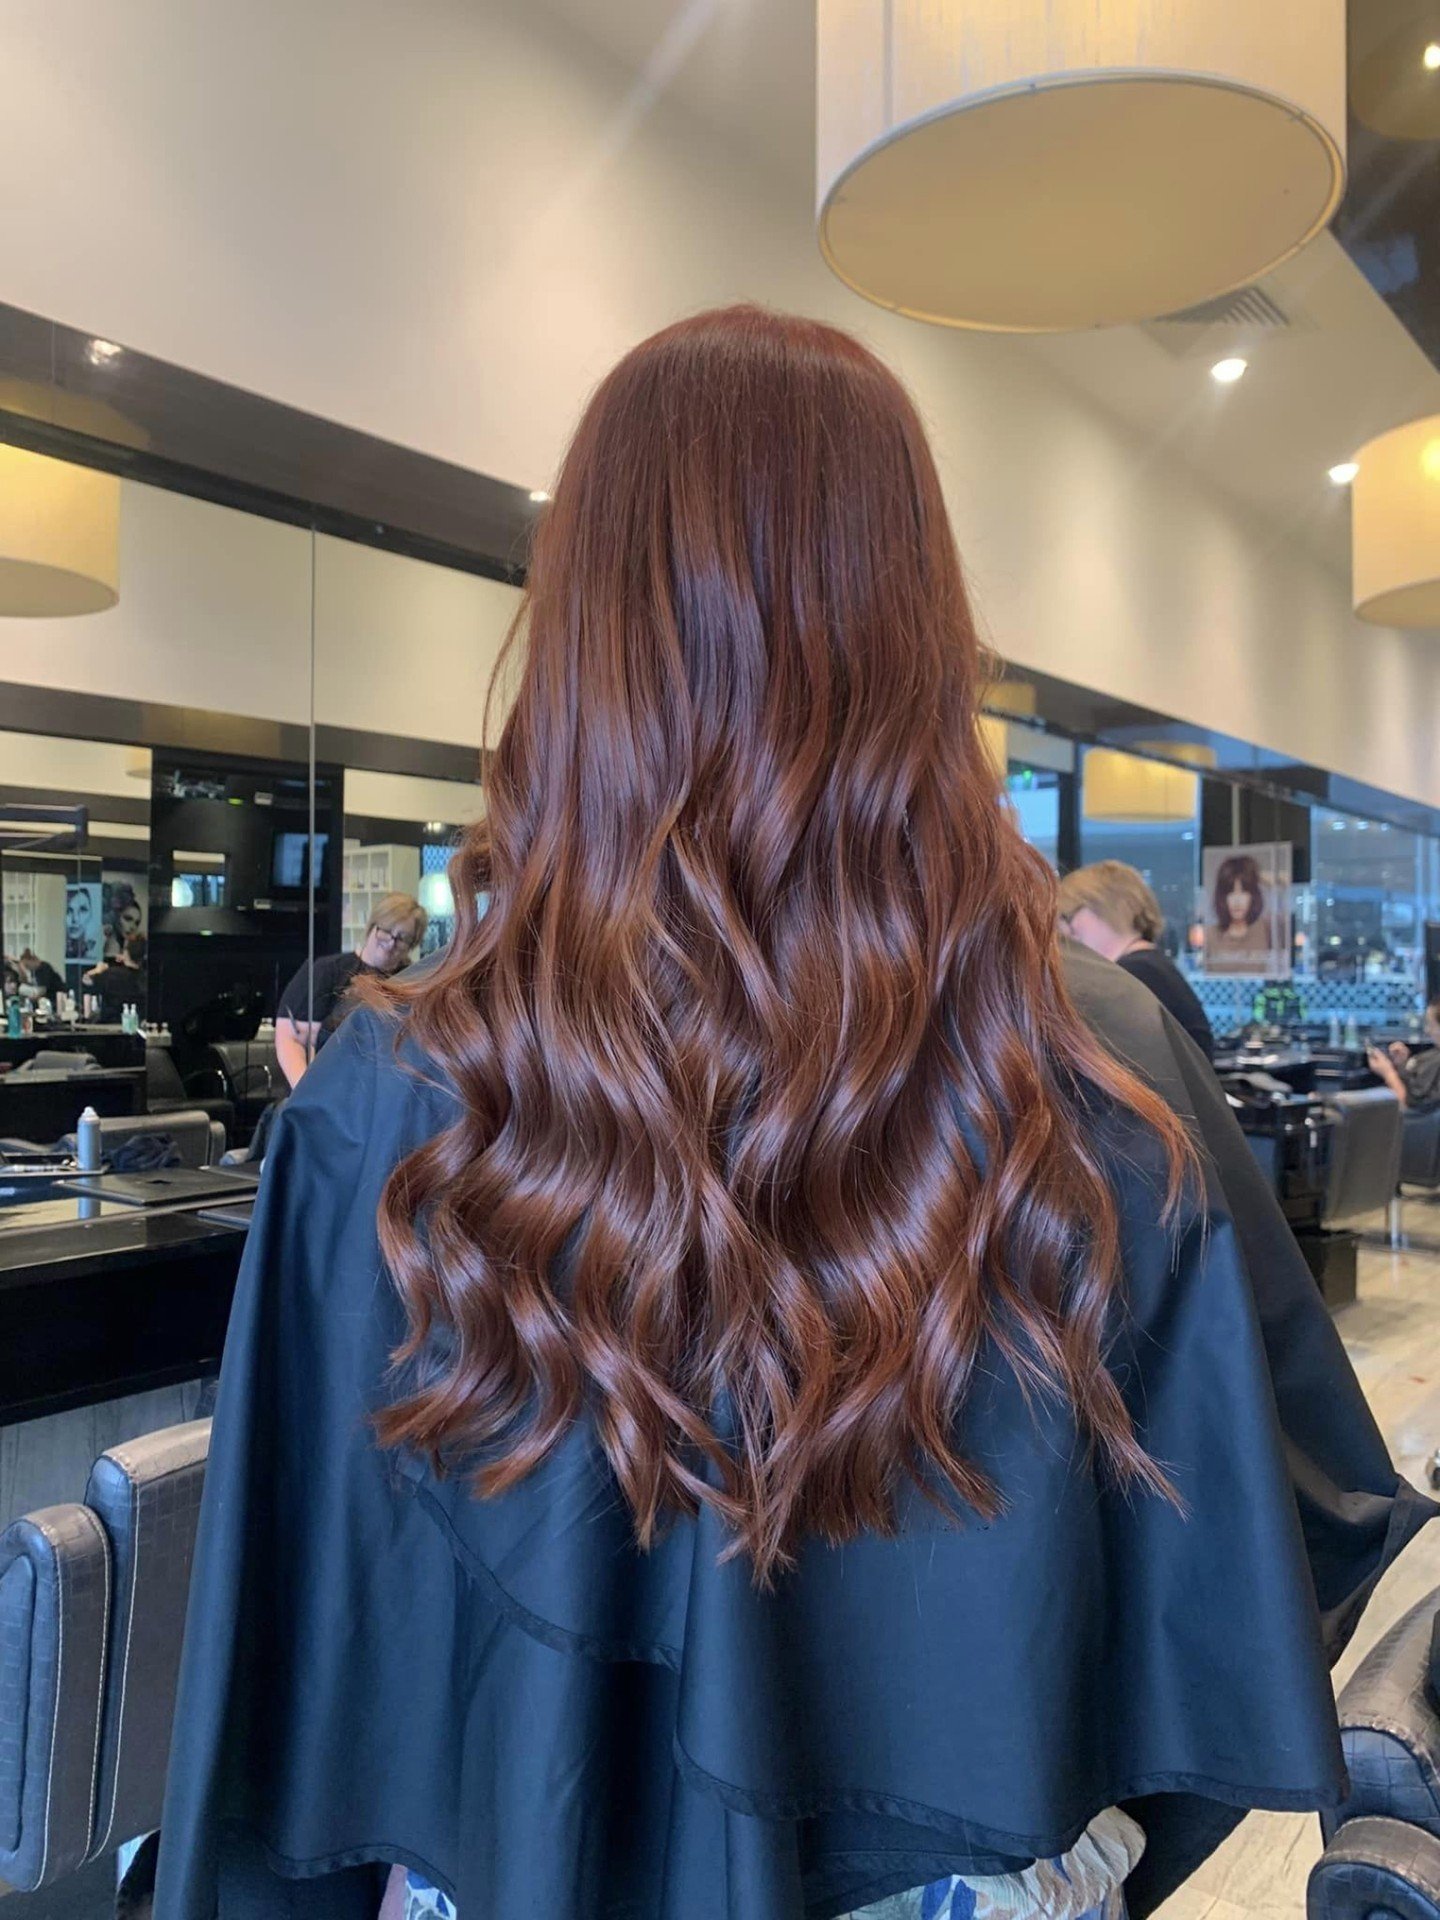 Step into our salon and let your hair become the canvas for your dreams. ✨

Our expert stylists craft personalized looks that ignite confidence and capture attention. 

Book an appointment today. Link in Bio